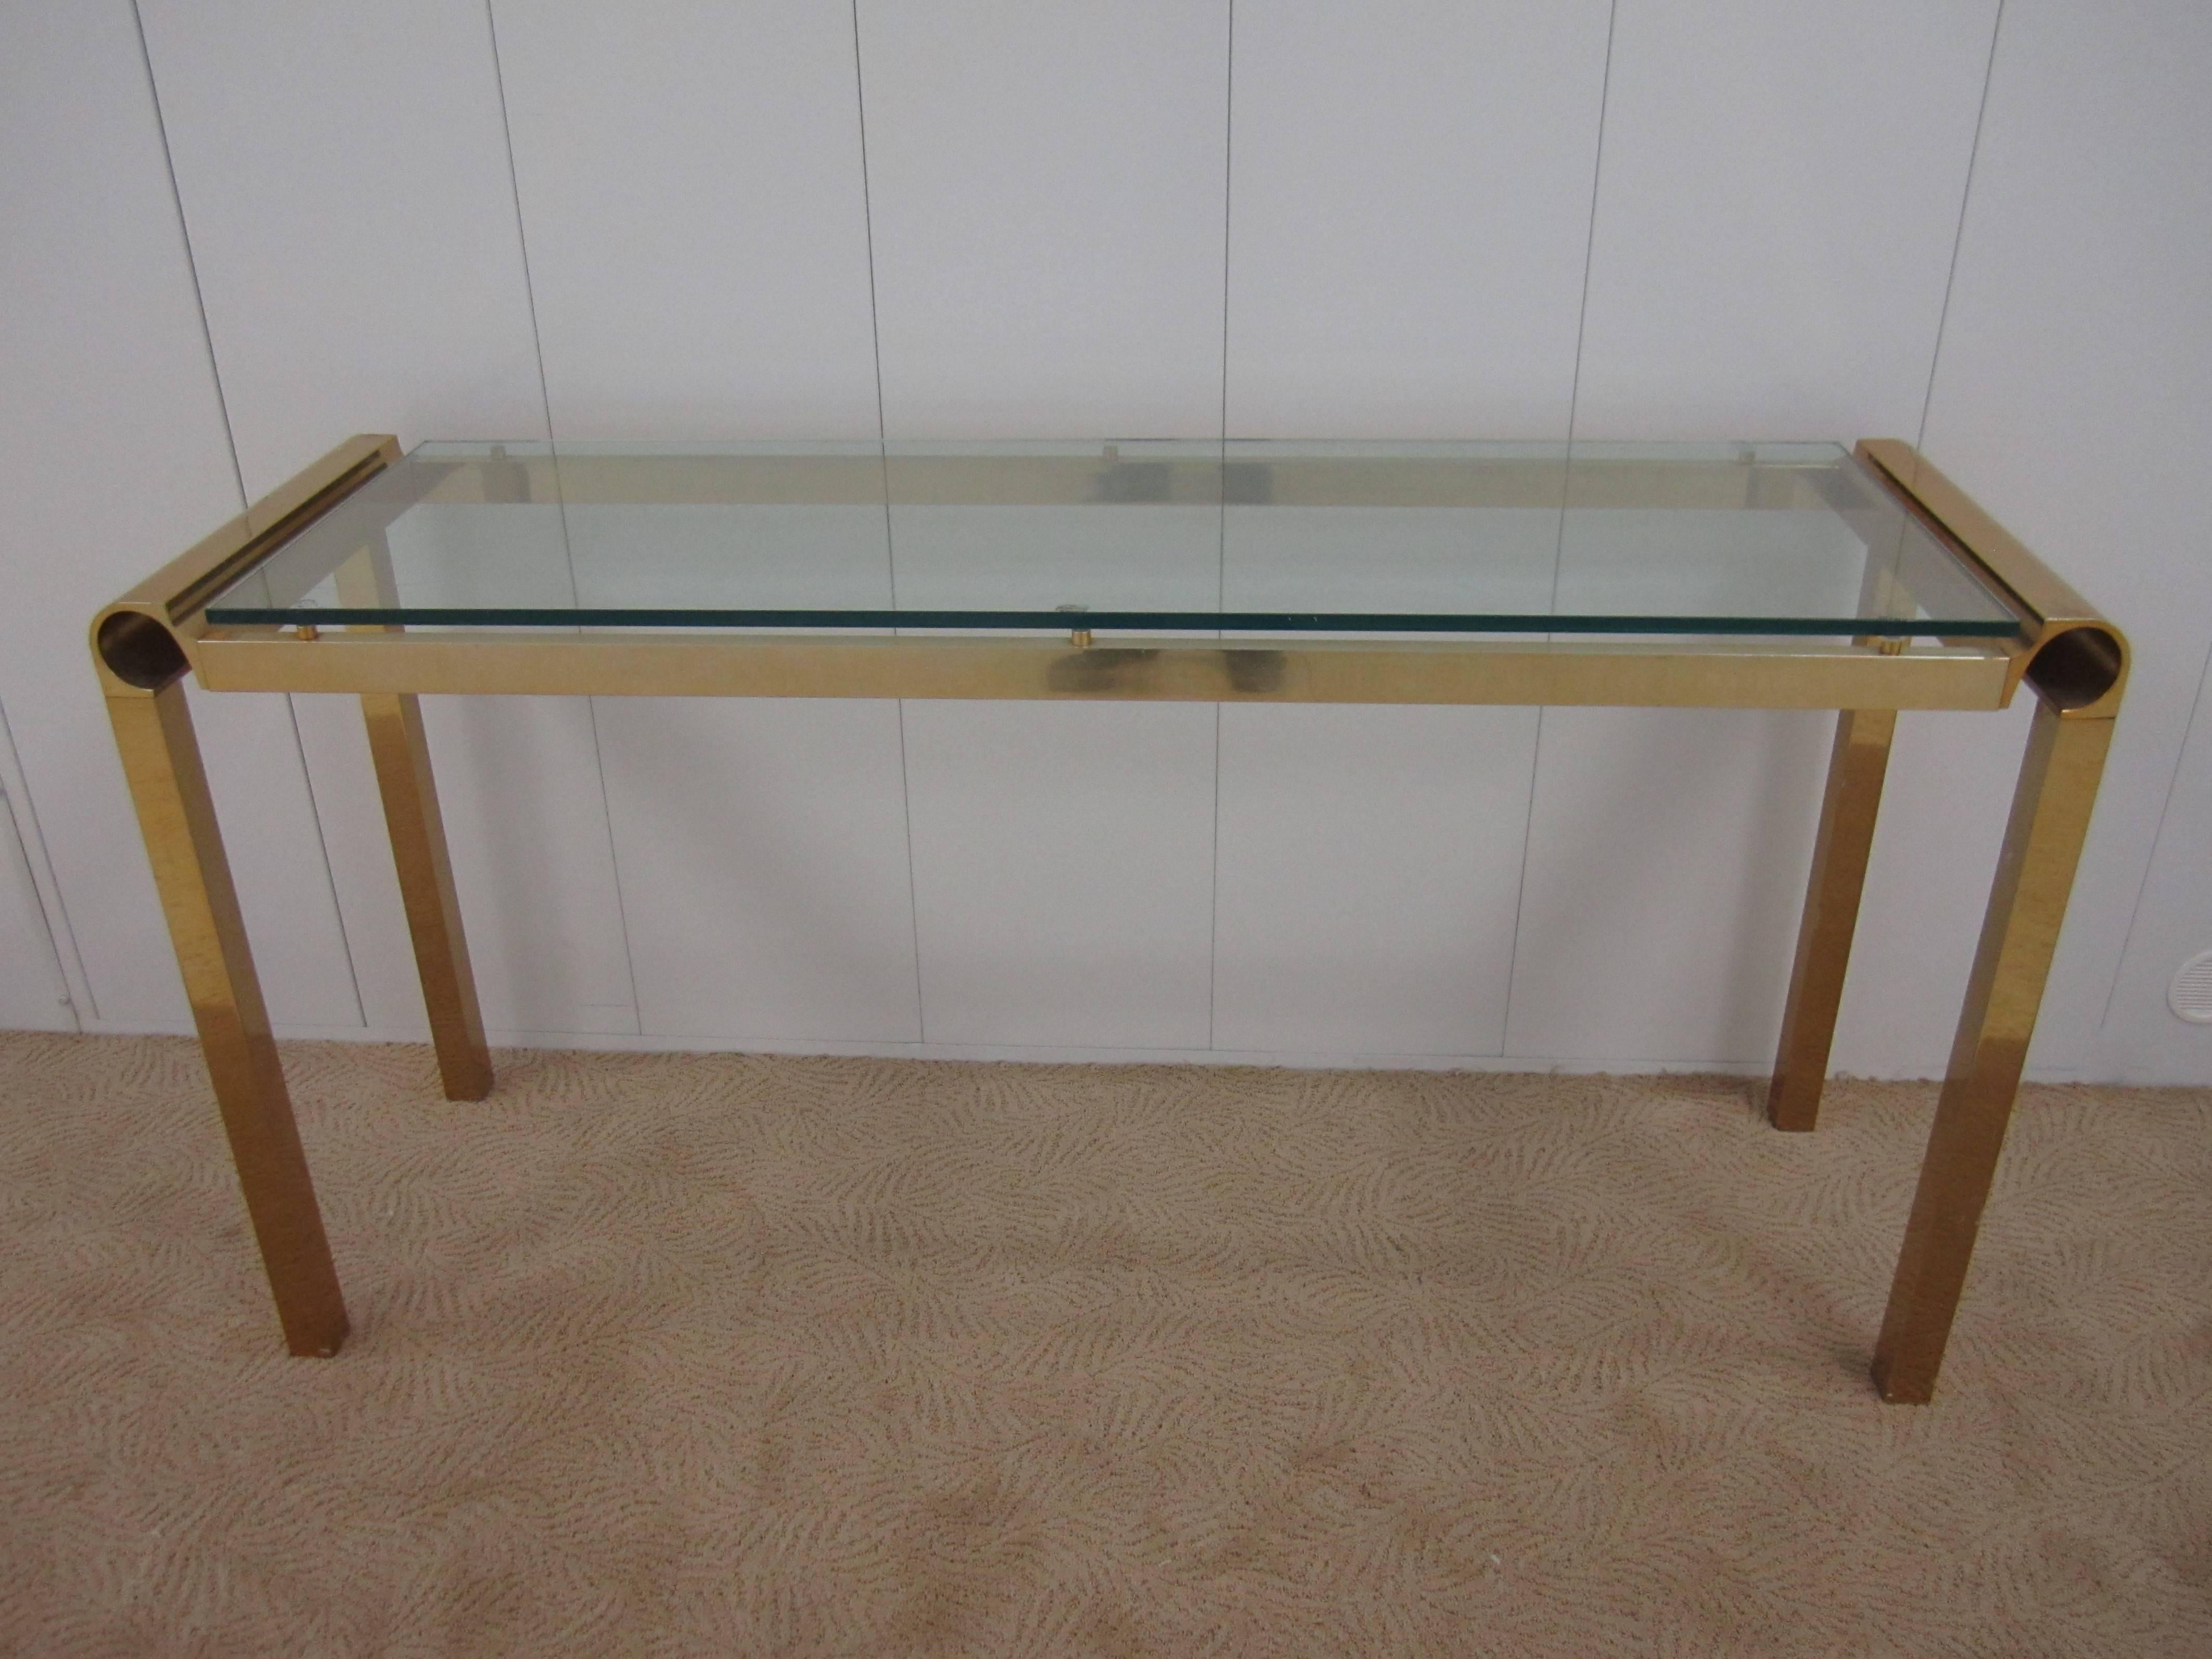 1970s Modern brass and glass console table in the style of Pierre Cardin. Half inch thick floating glass top. Brass top with 'C' curve detail and square brass-plated legs. 